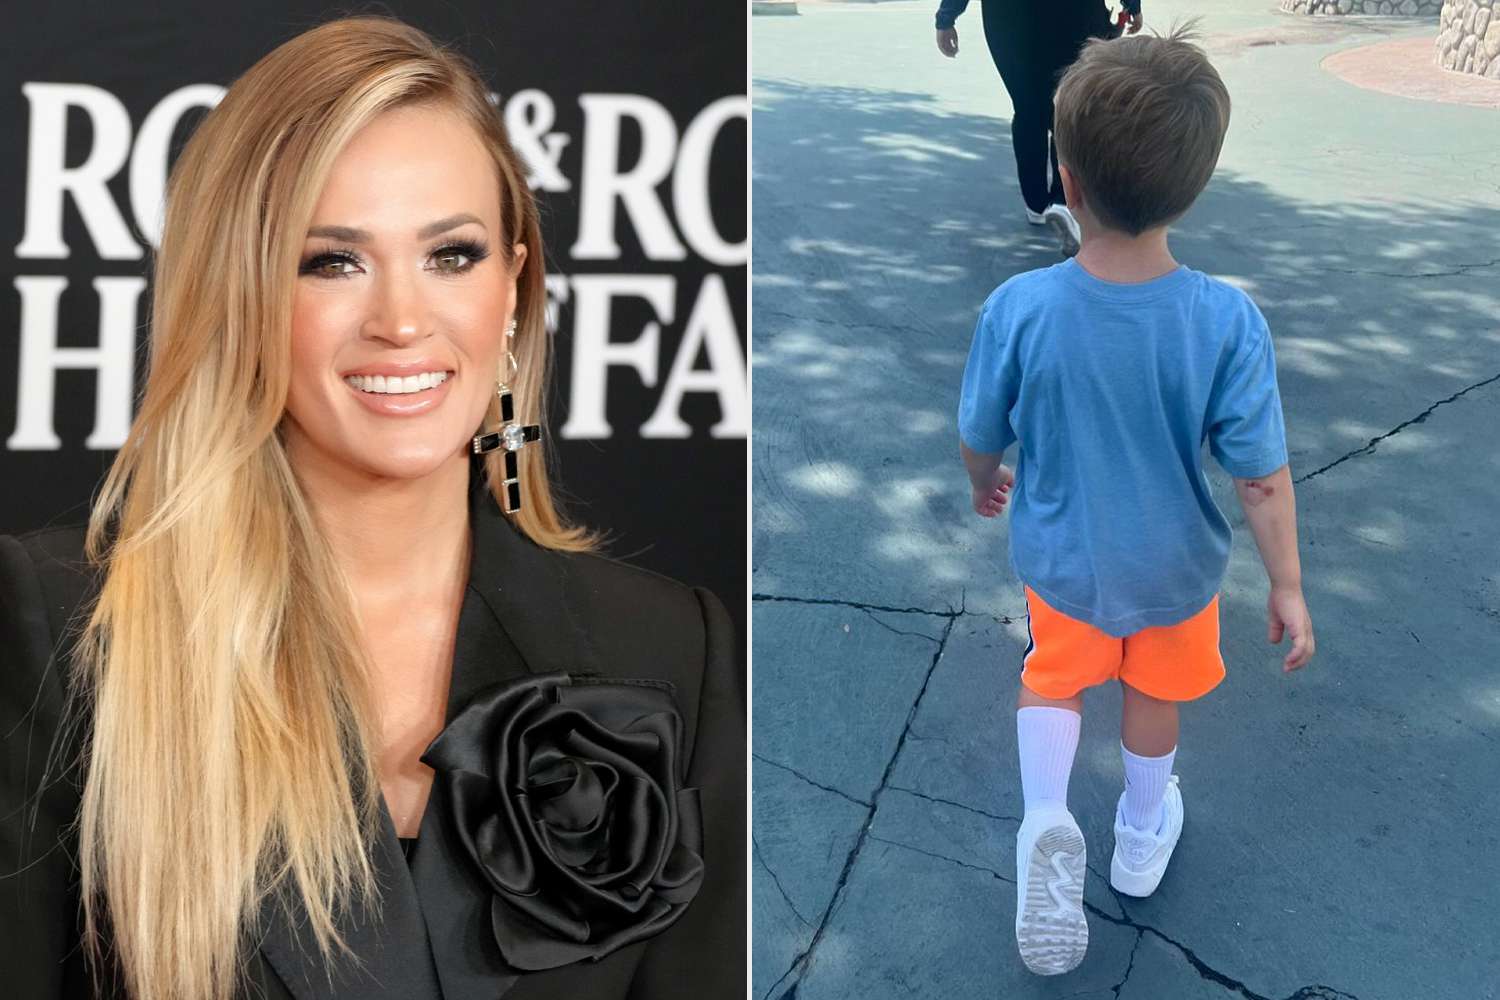 Carrie Underwood Shares Rare Photos of Son Jacob, 5, as They Have the 'Best Day' at Six Flags: 'Life Flies By'